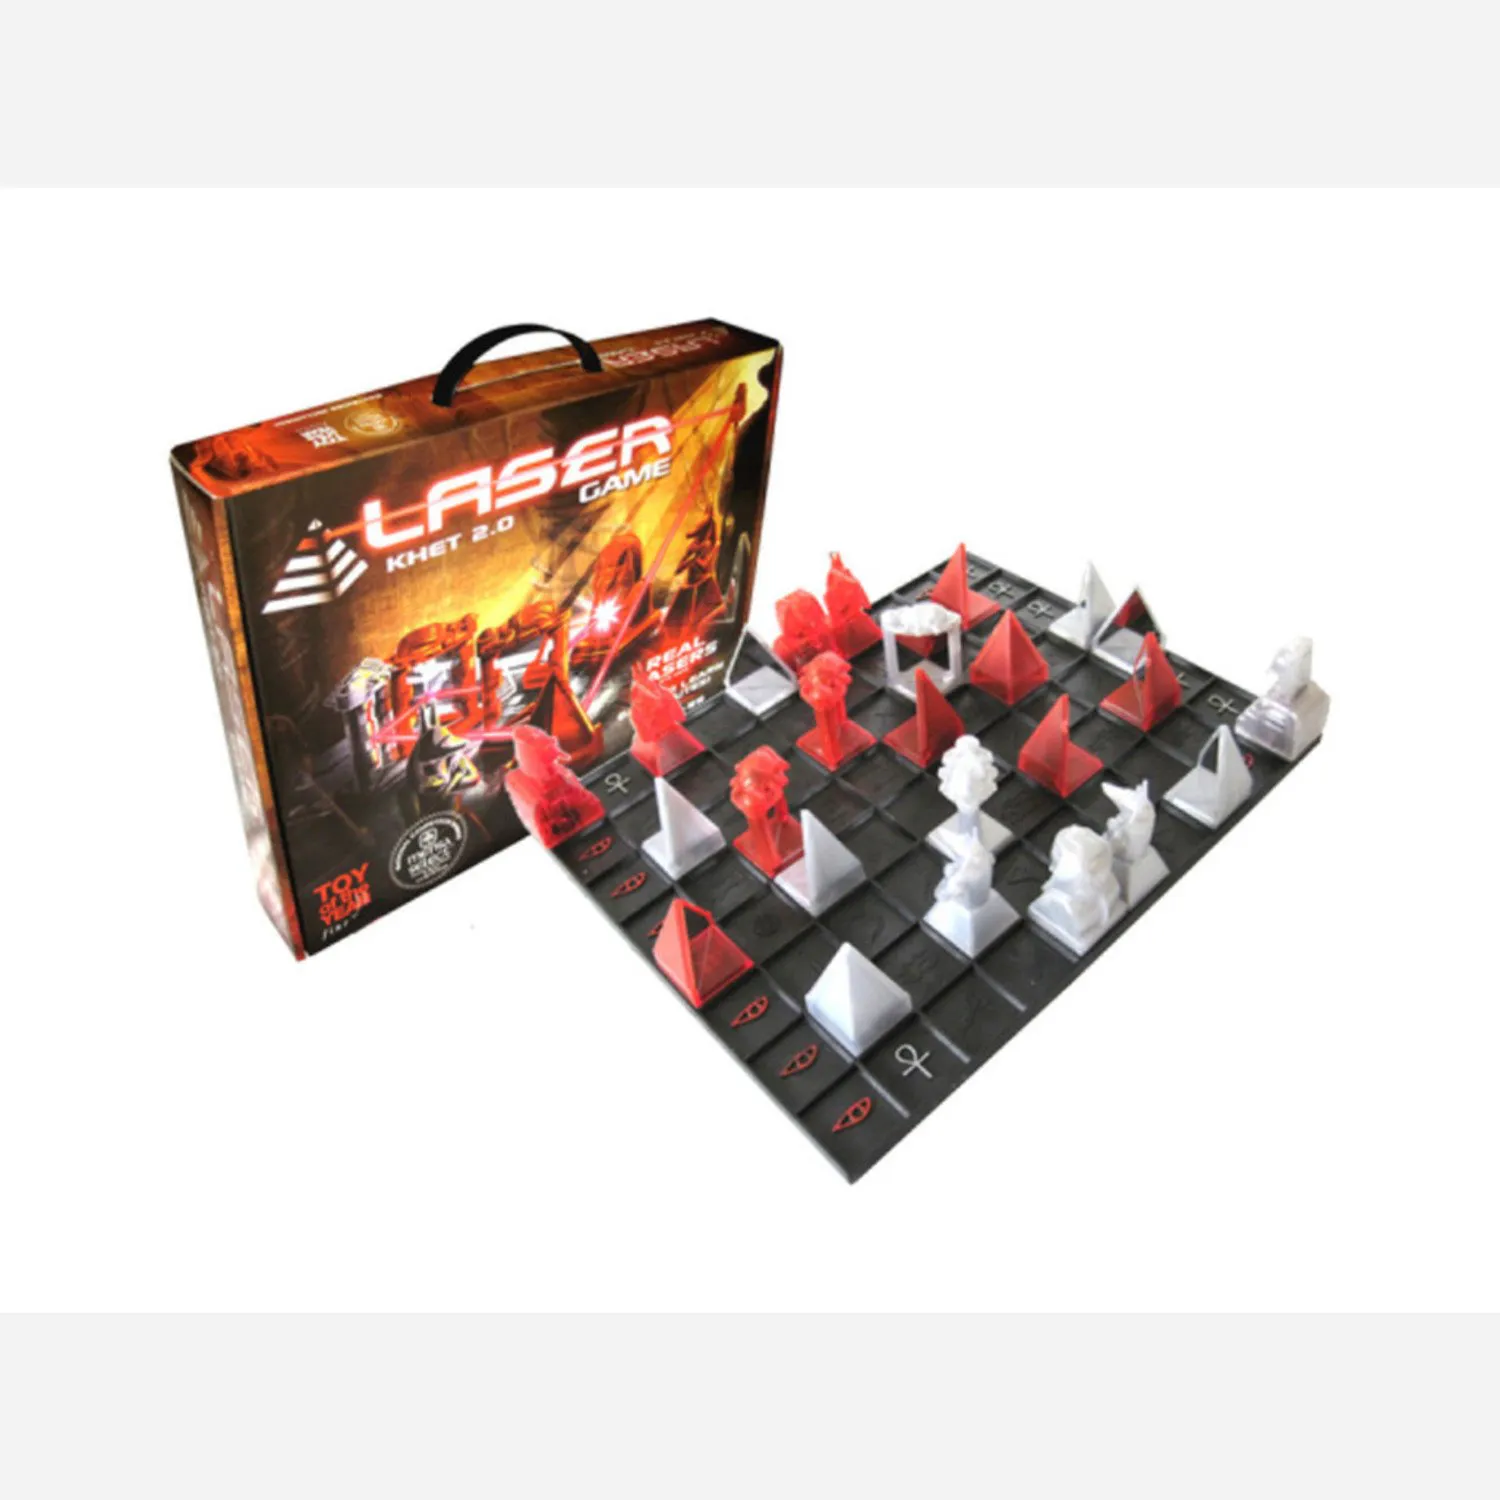 Photo of The Laser Game: KHET 2.0